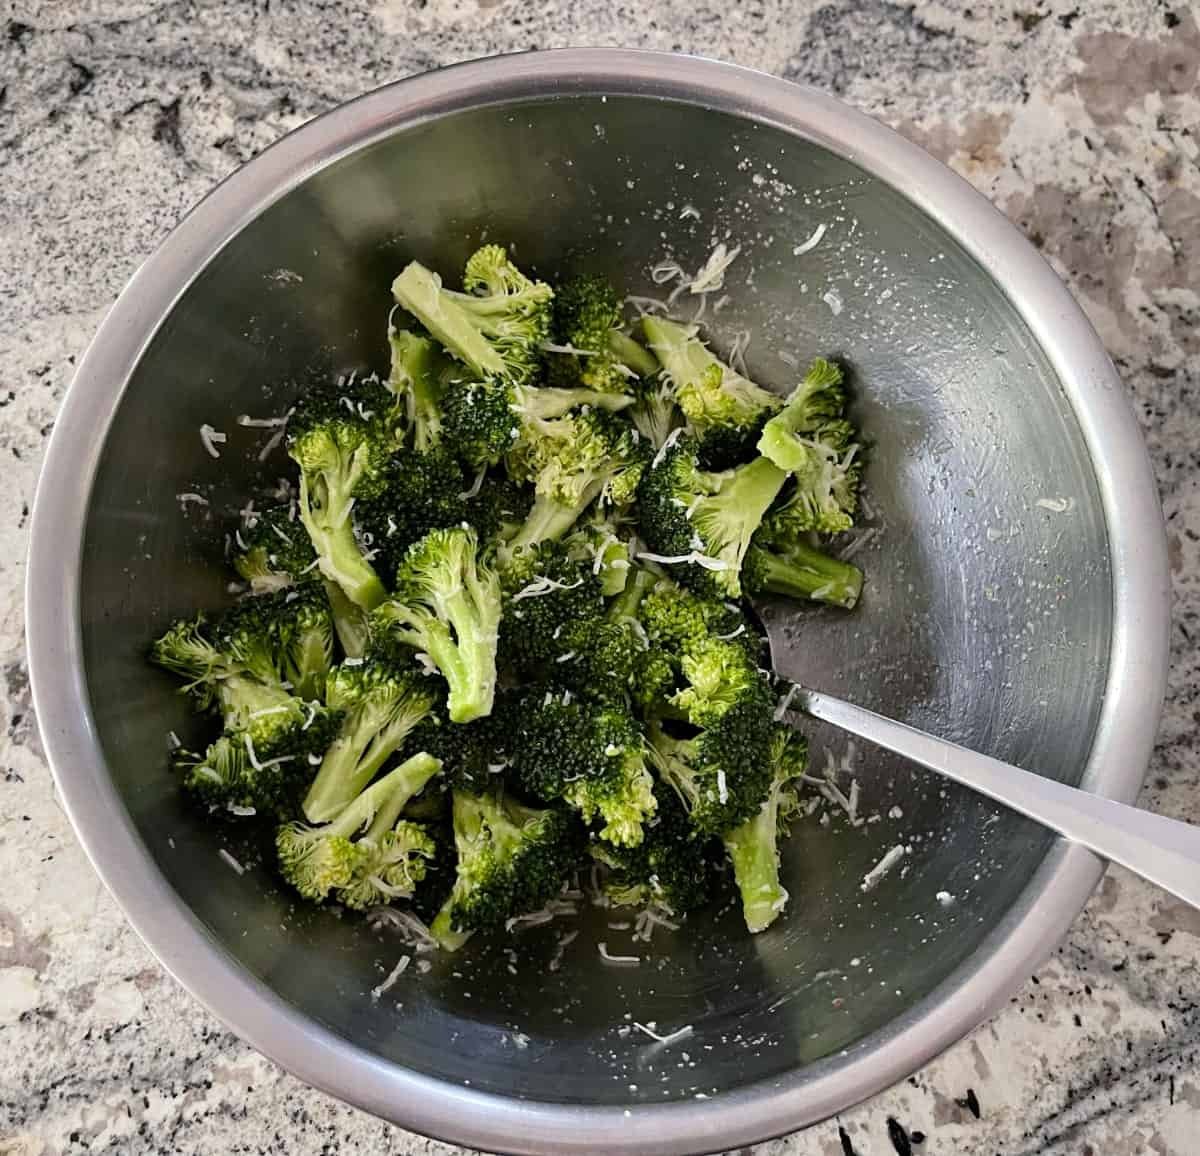 Broccoli florets, grated Parmesan, olive oil and garlic powder tossed in bowl with spoon.